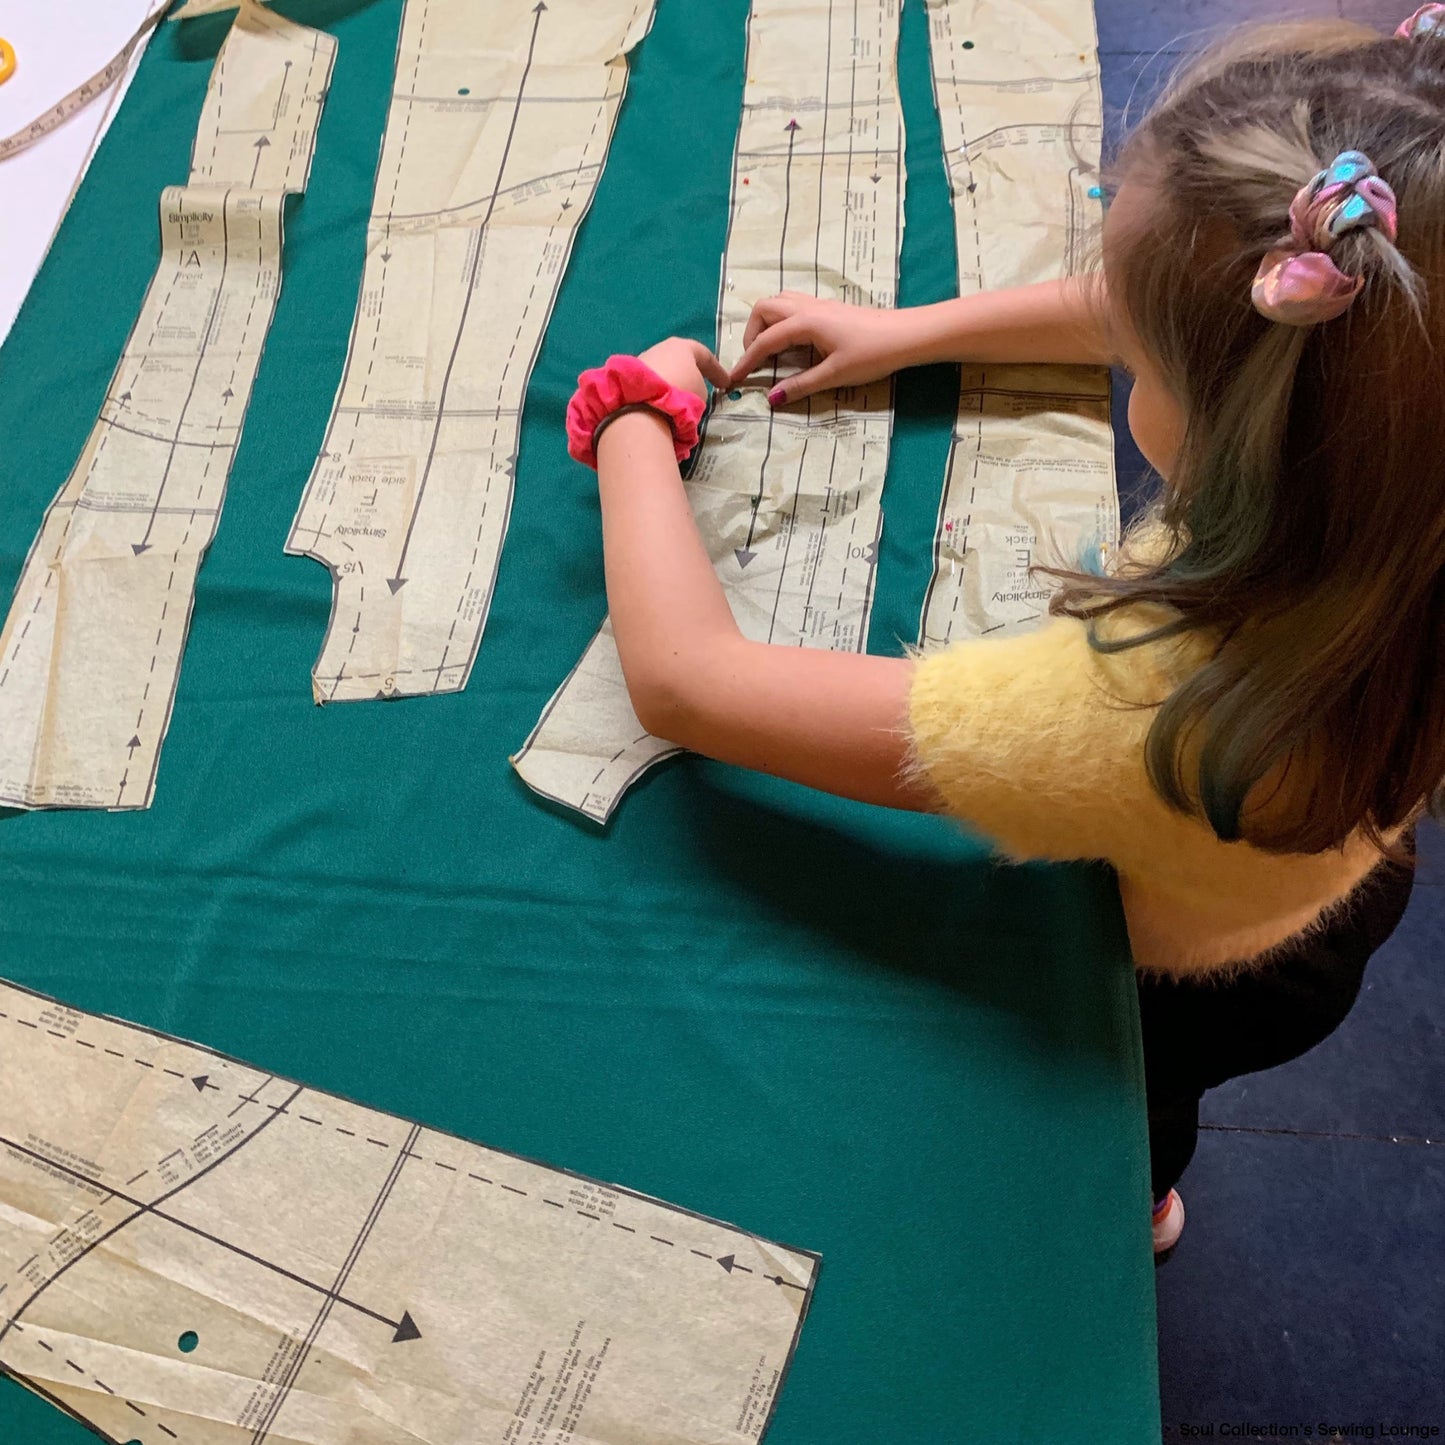 Afterschool In Shop Sewing Classes - Jan 24th, Monday - Kids Sewing Classes